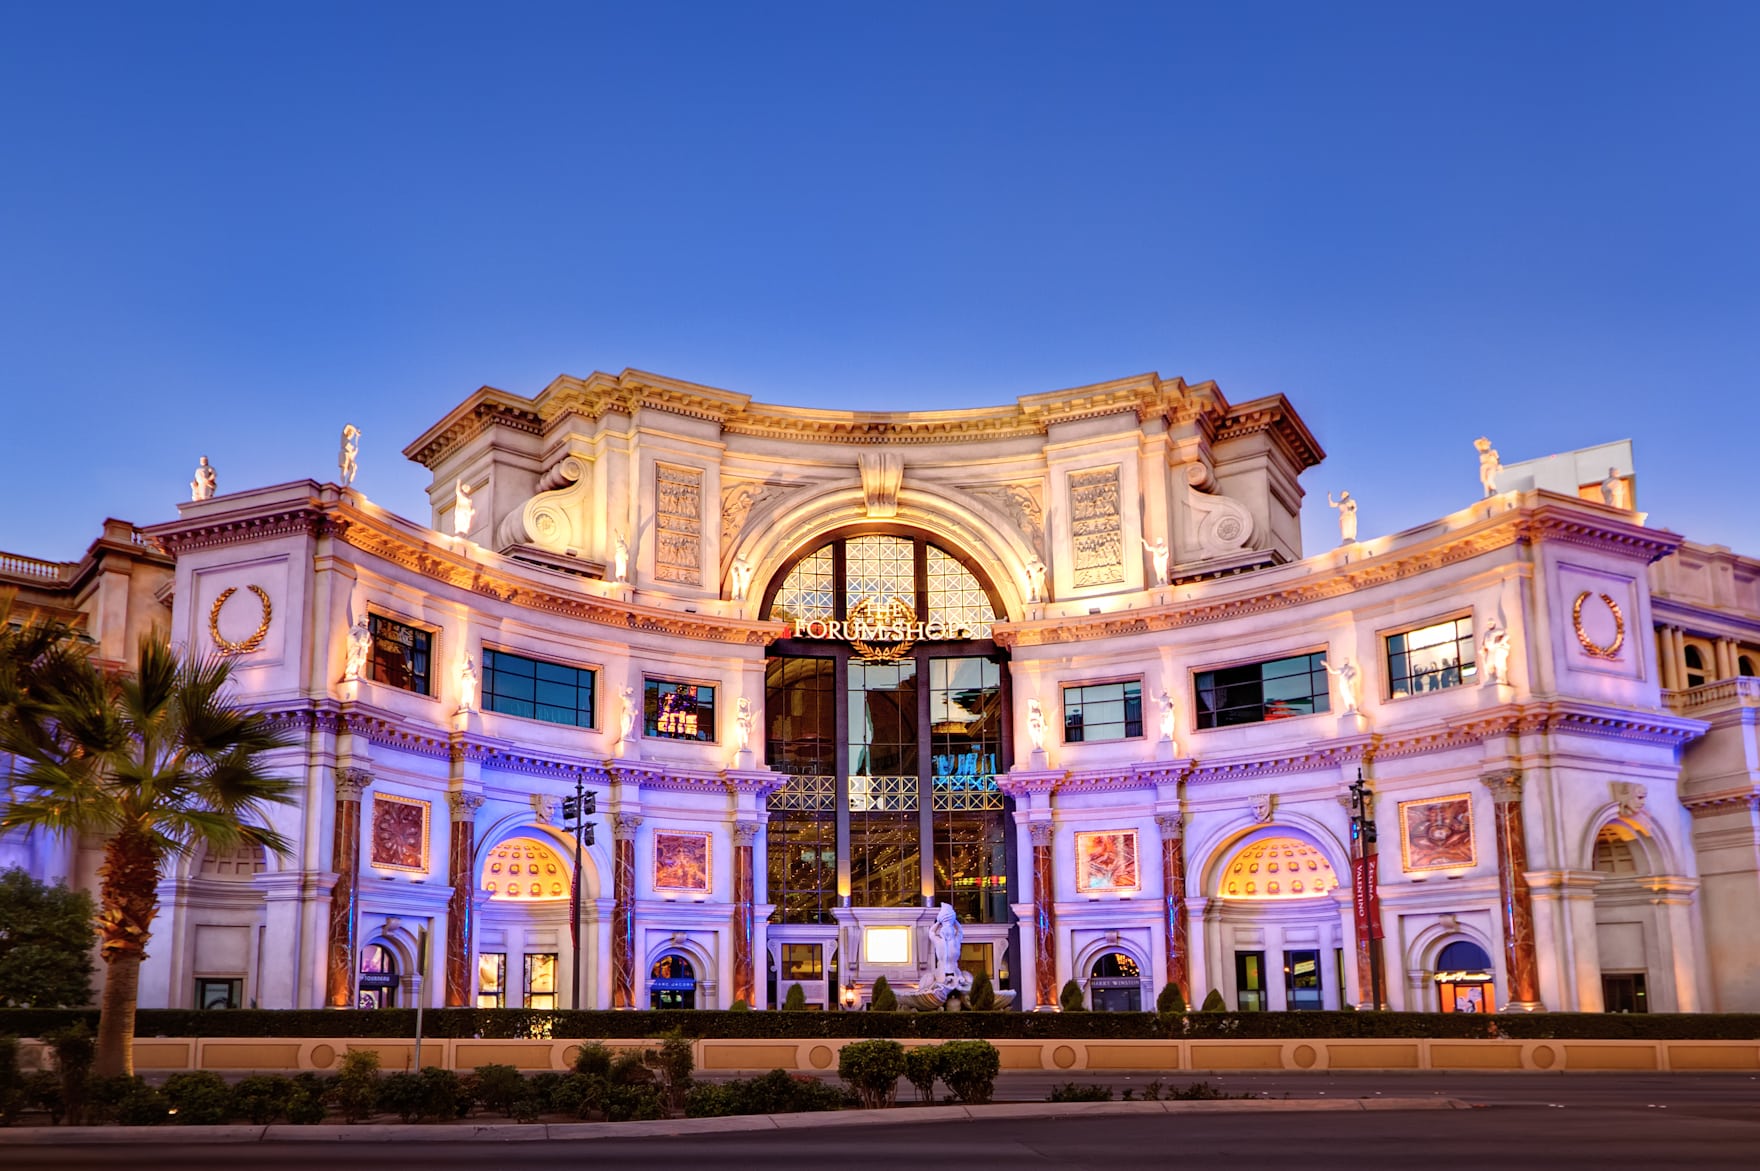 Guide to The Forum Shops at Caesars Palace